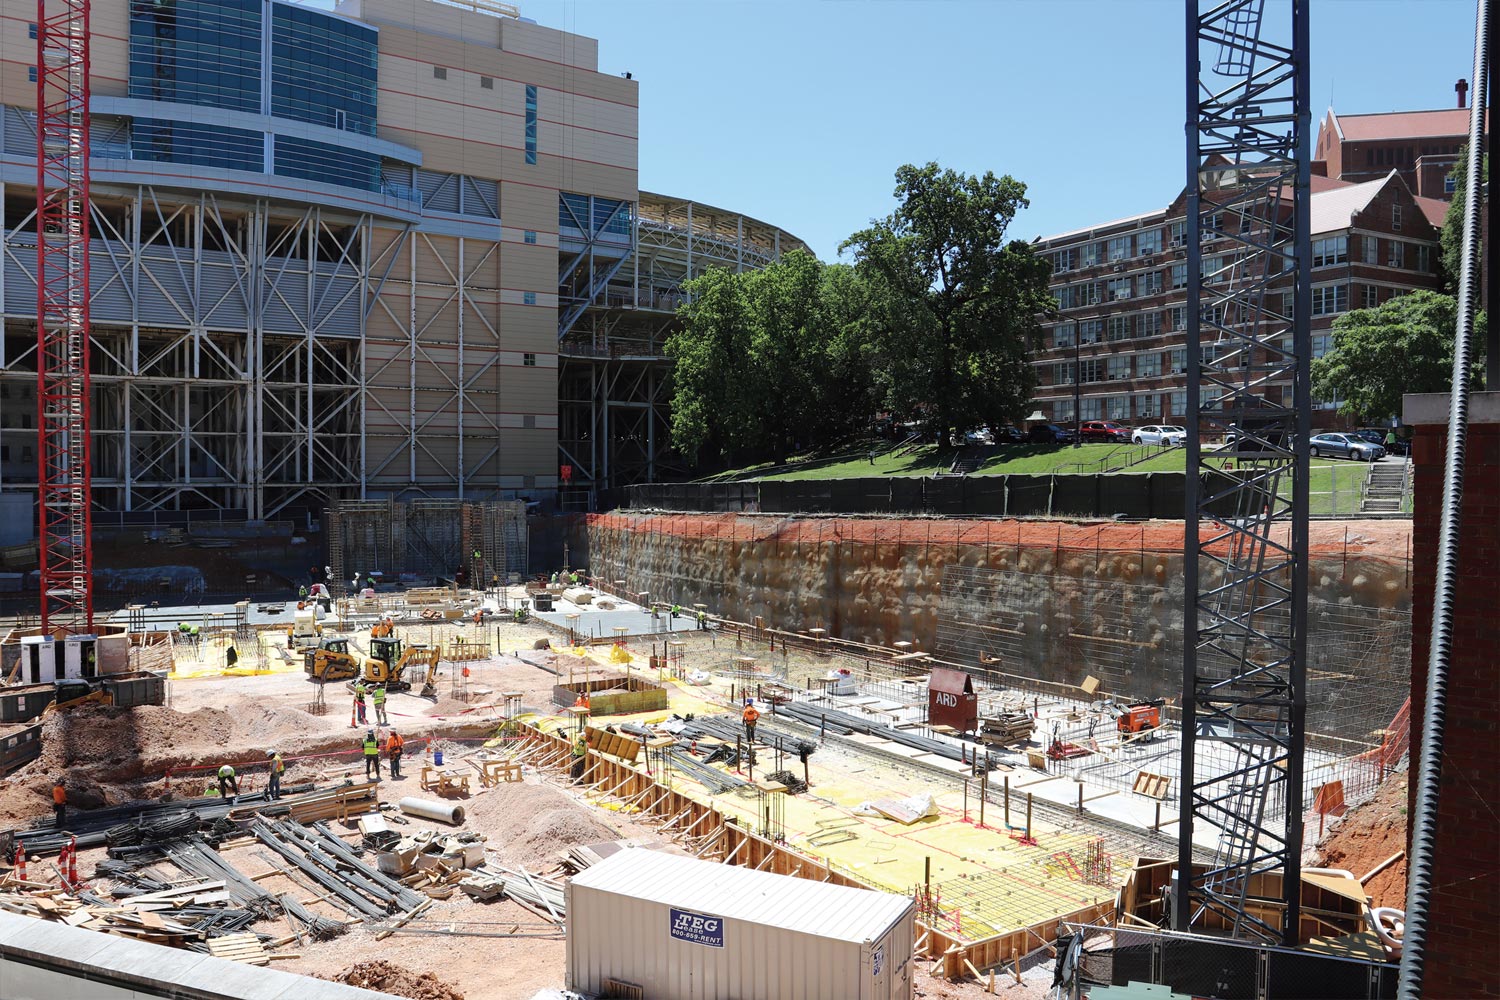 The groundwork was done and the new building’s foundation began to take shape by May 2019.